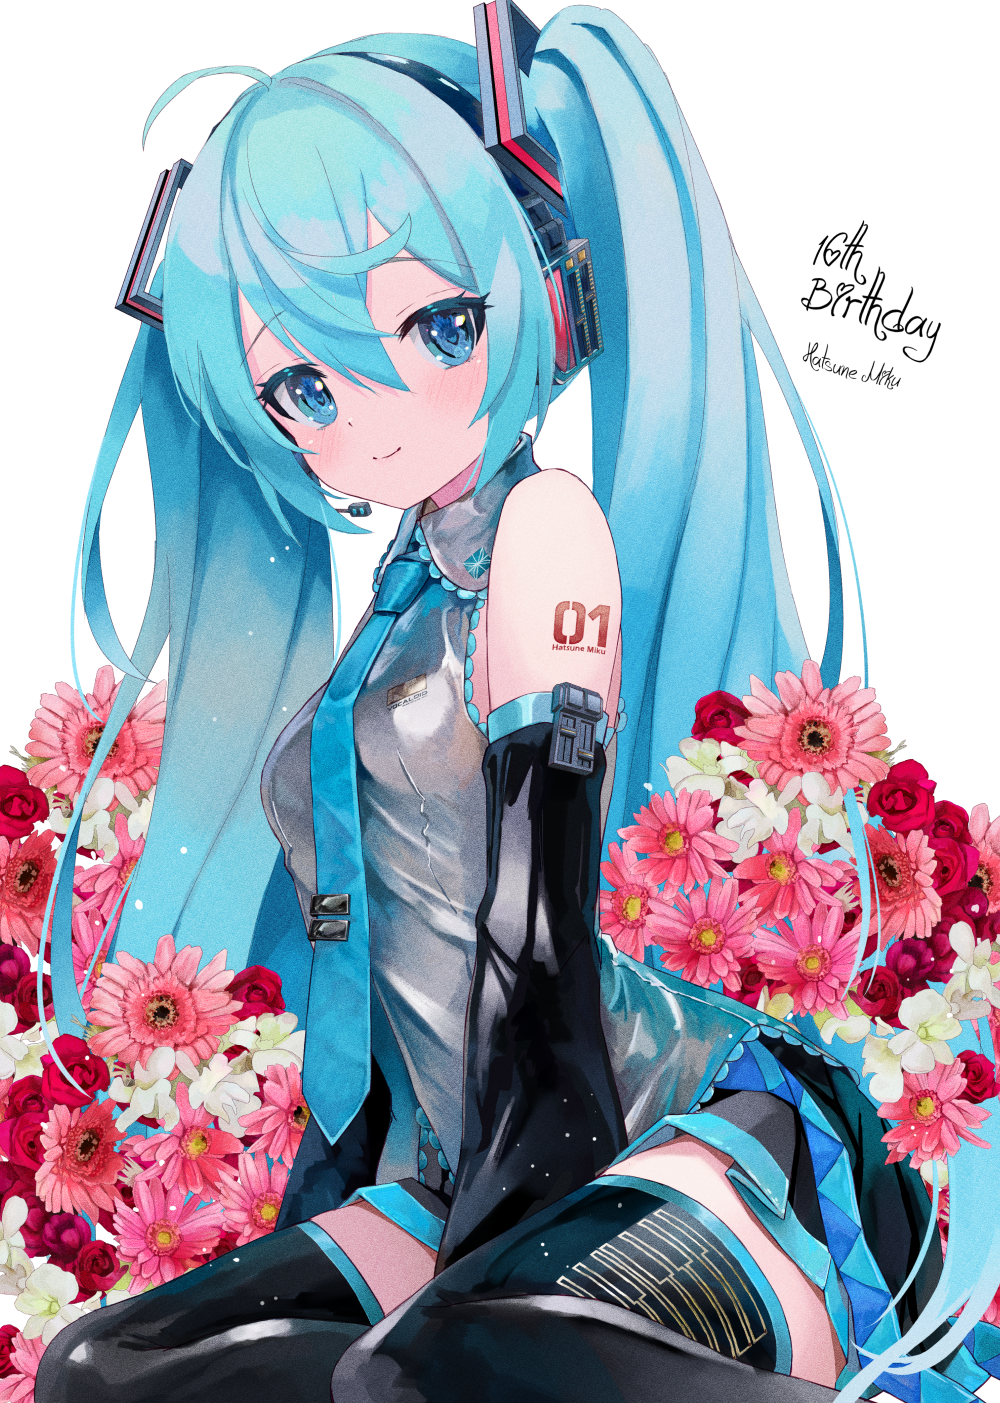 Let Forever Be-初音未来VOCALOID